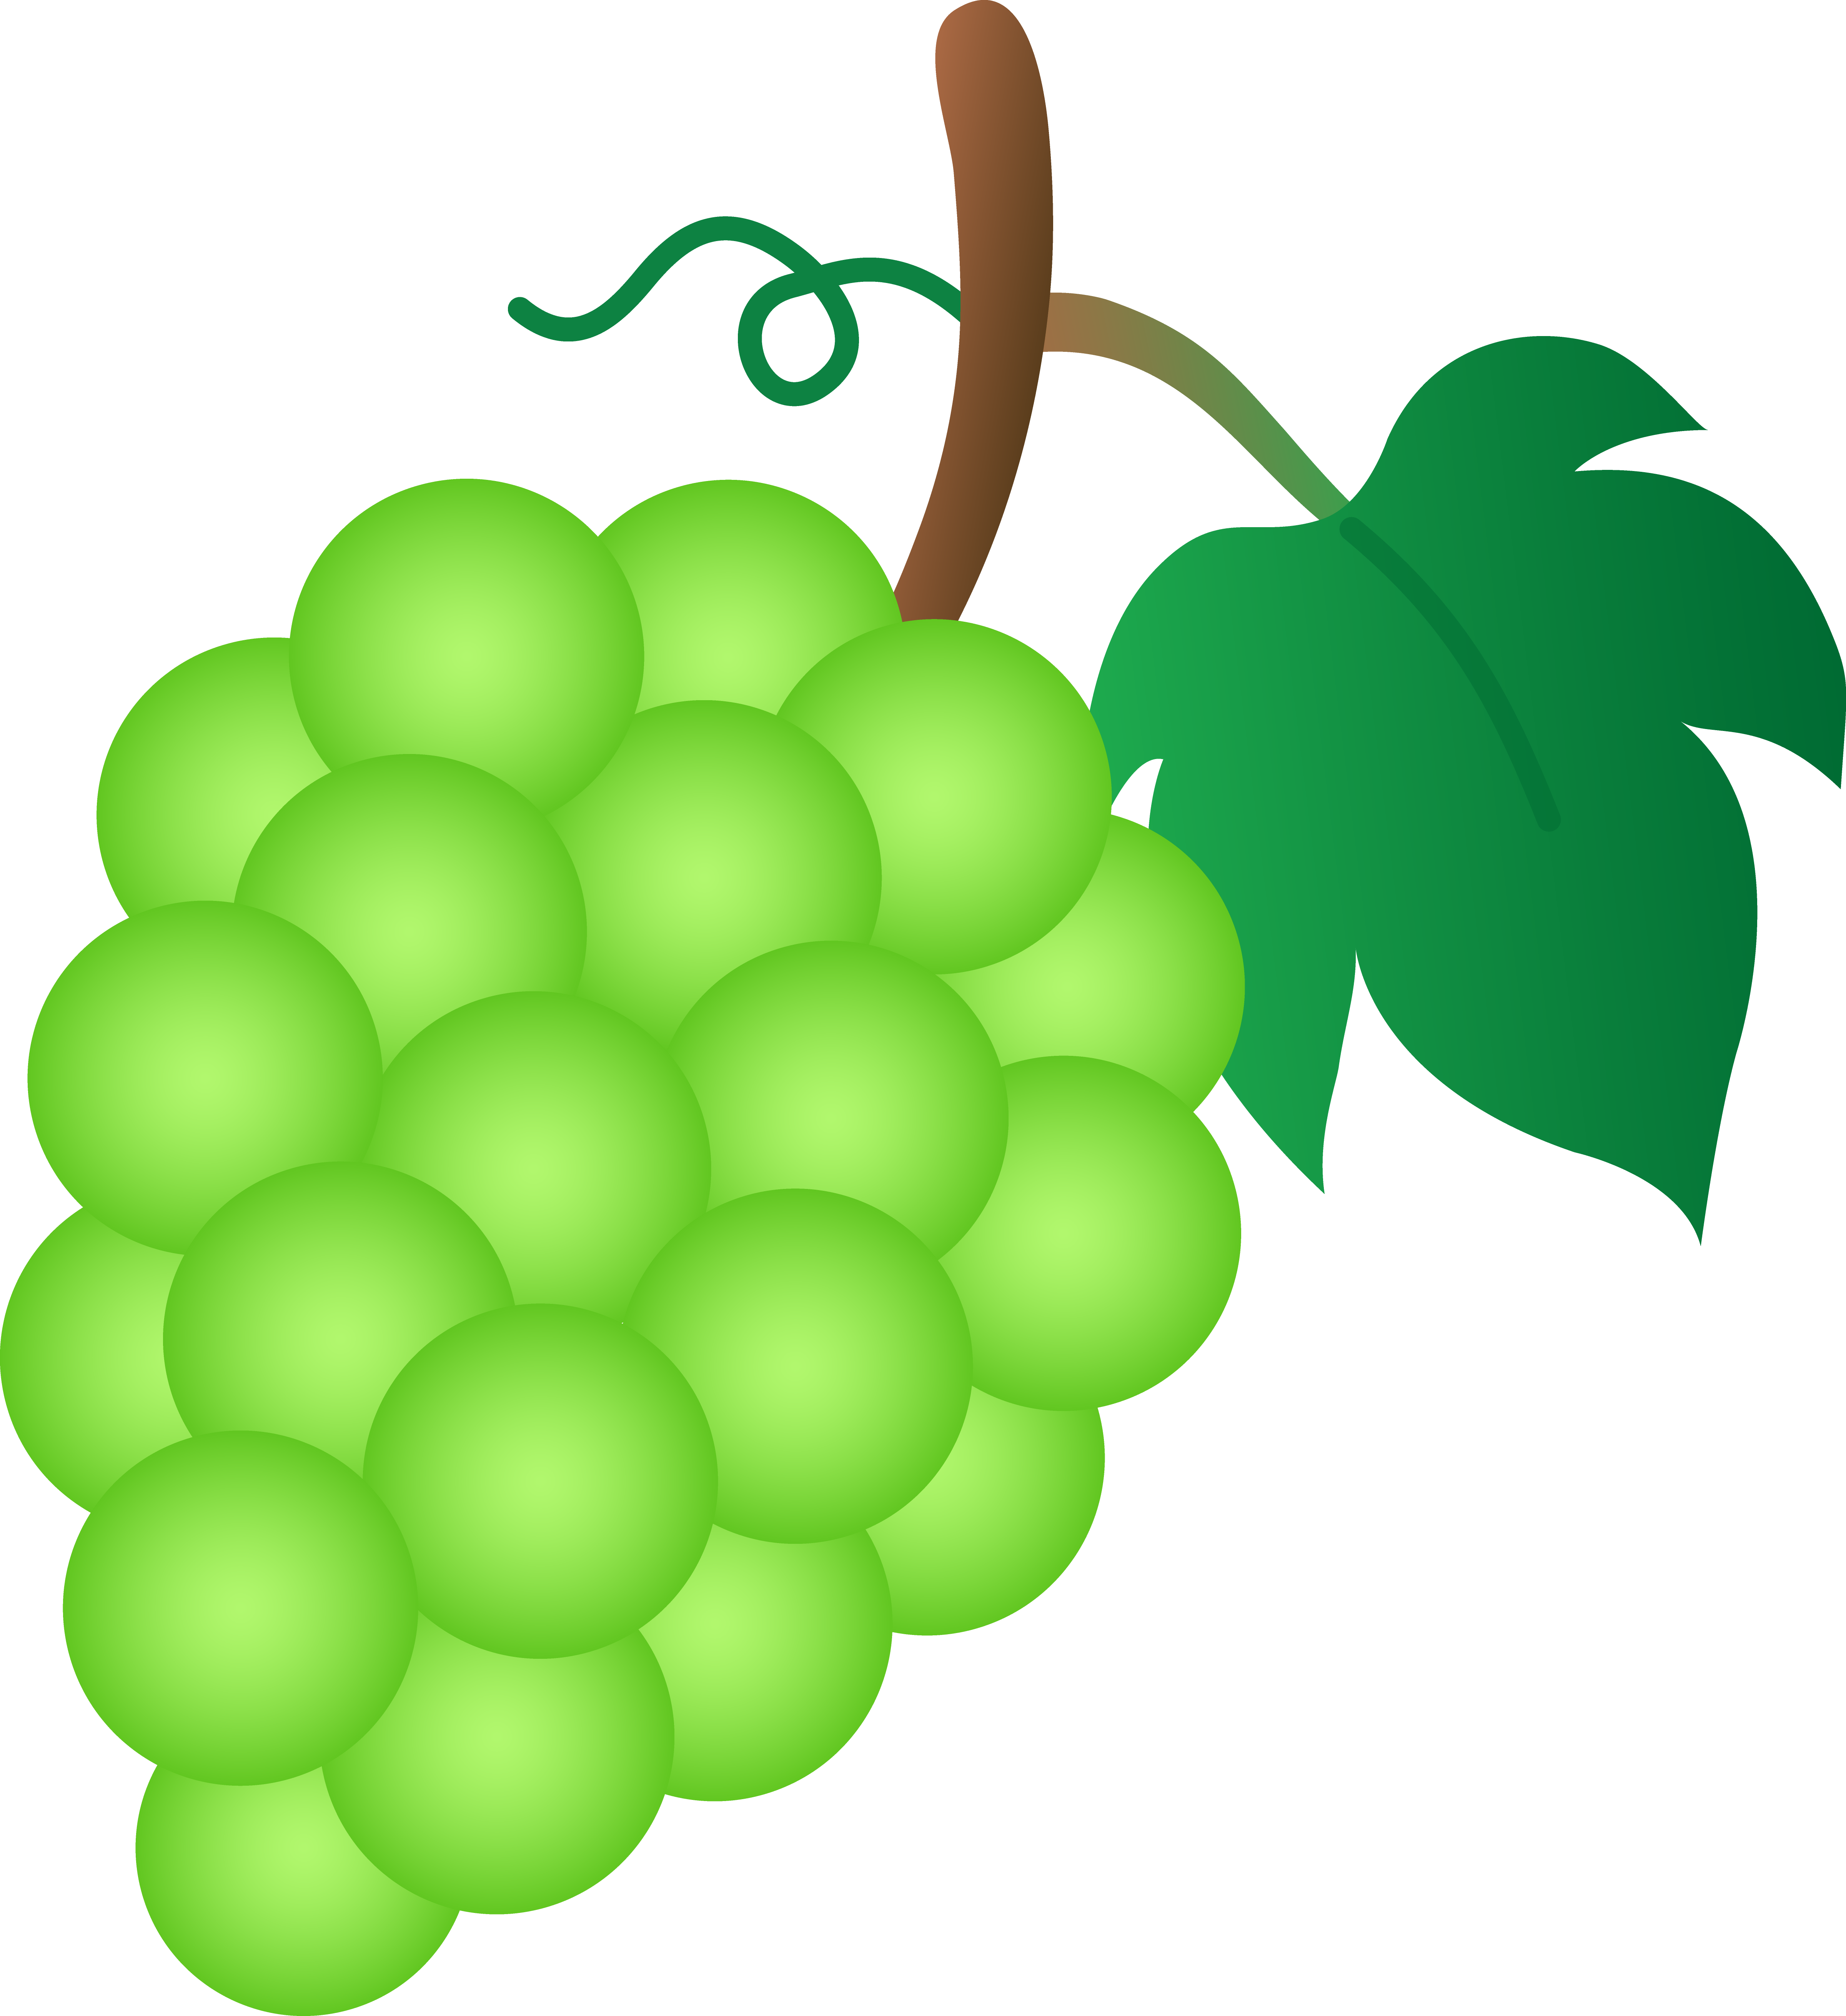 Green Grapes Clipart | Clipart Panda - Free Clipart Images